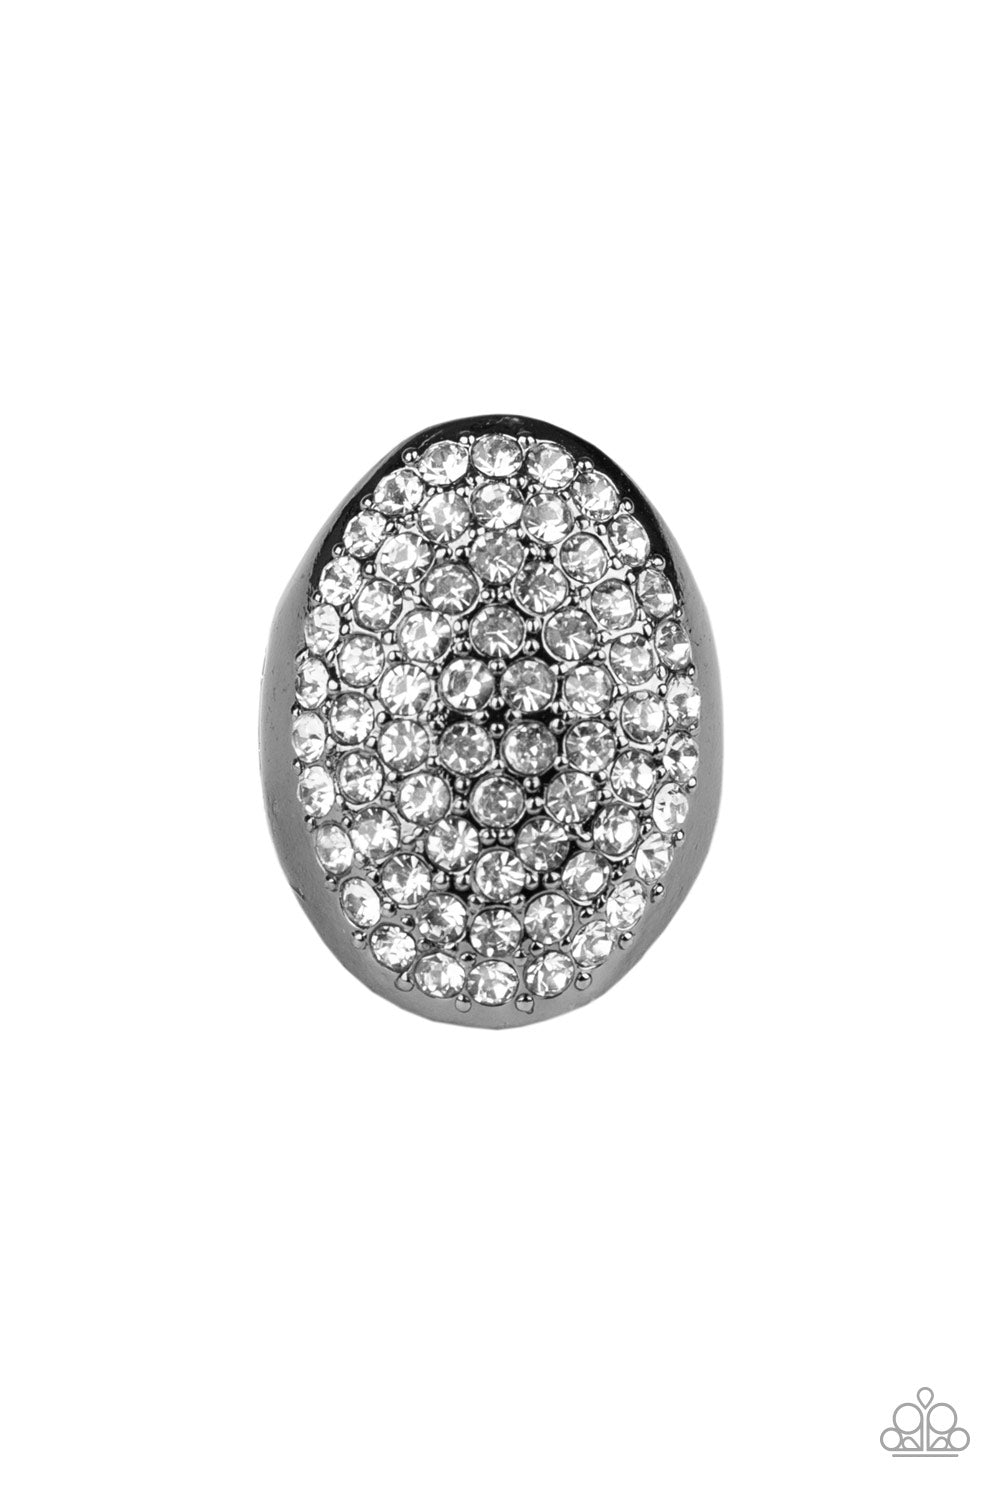 Paparazzi Bling Scene Black Ring - Life Of The Party Exclusive March 2020 - P4BA-BKXX-029XX